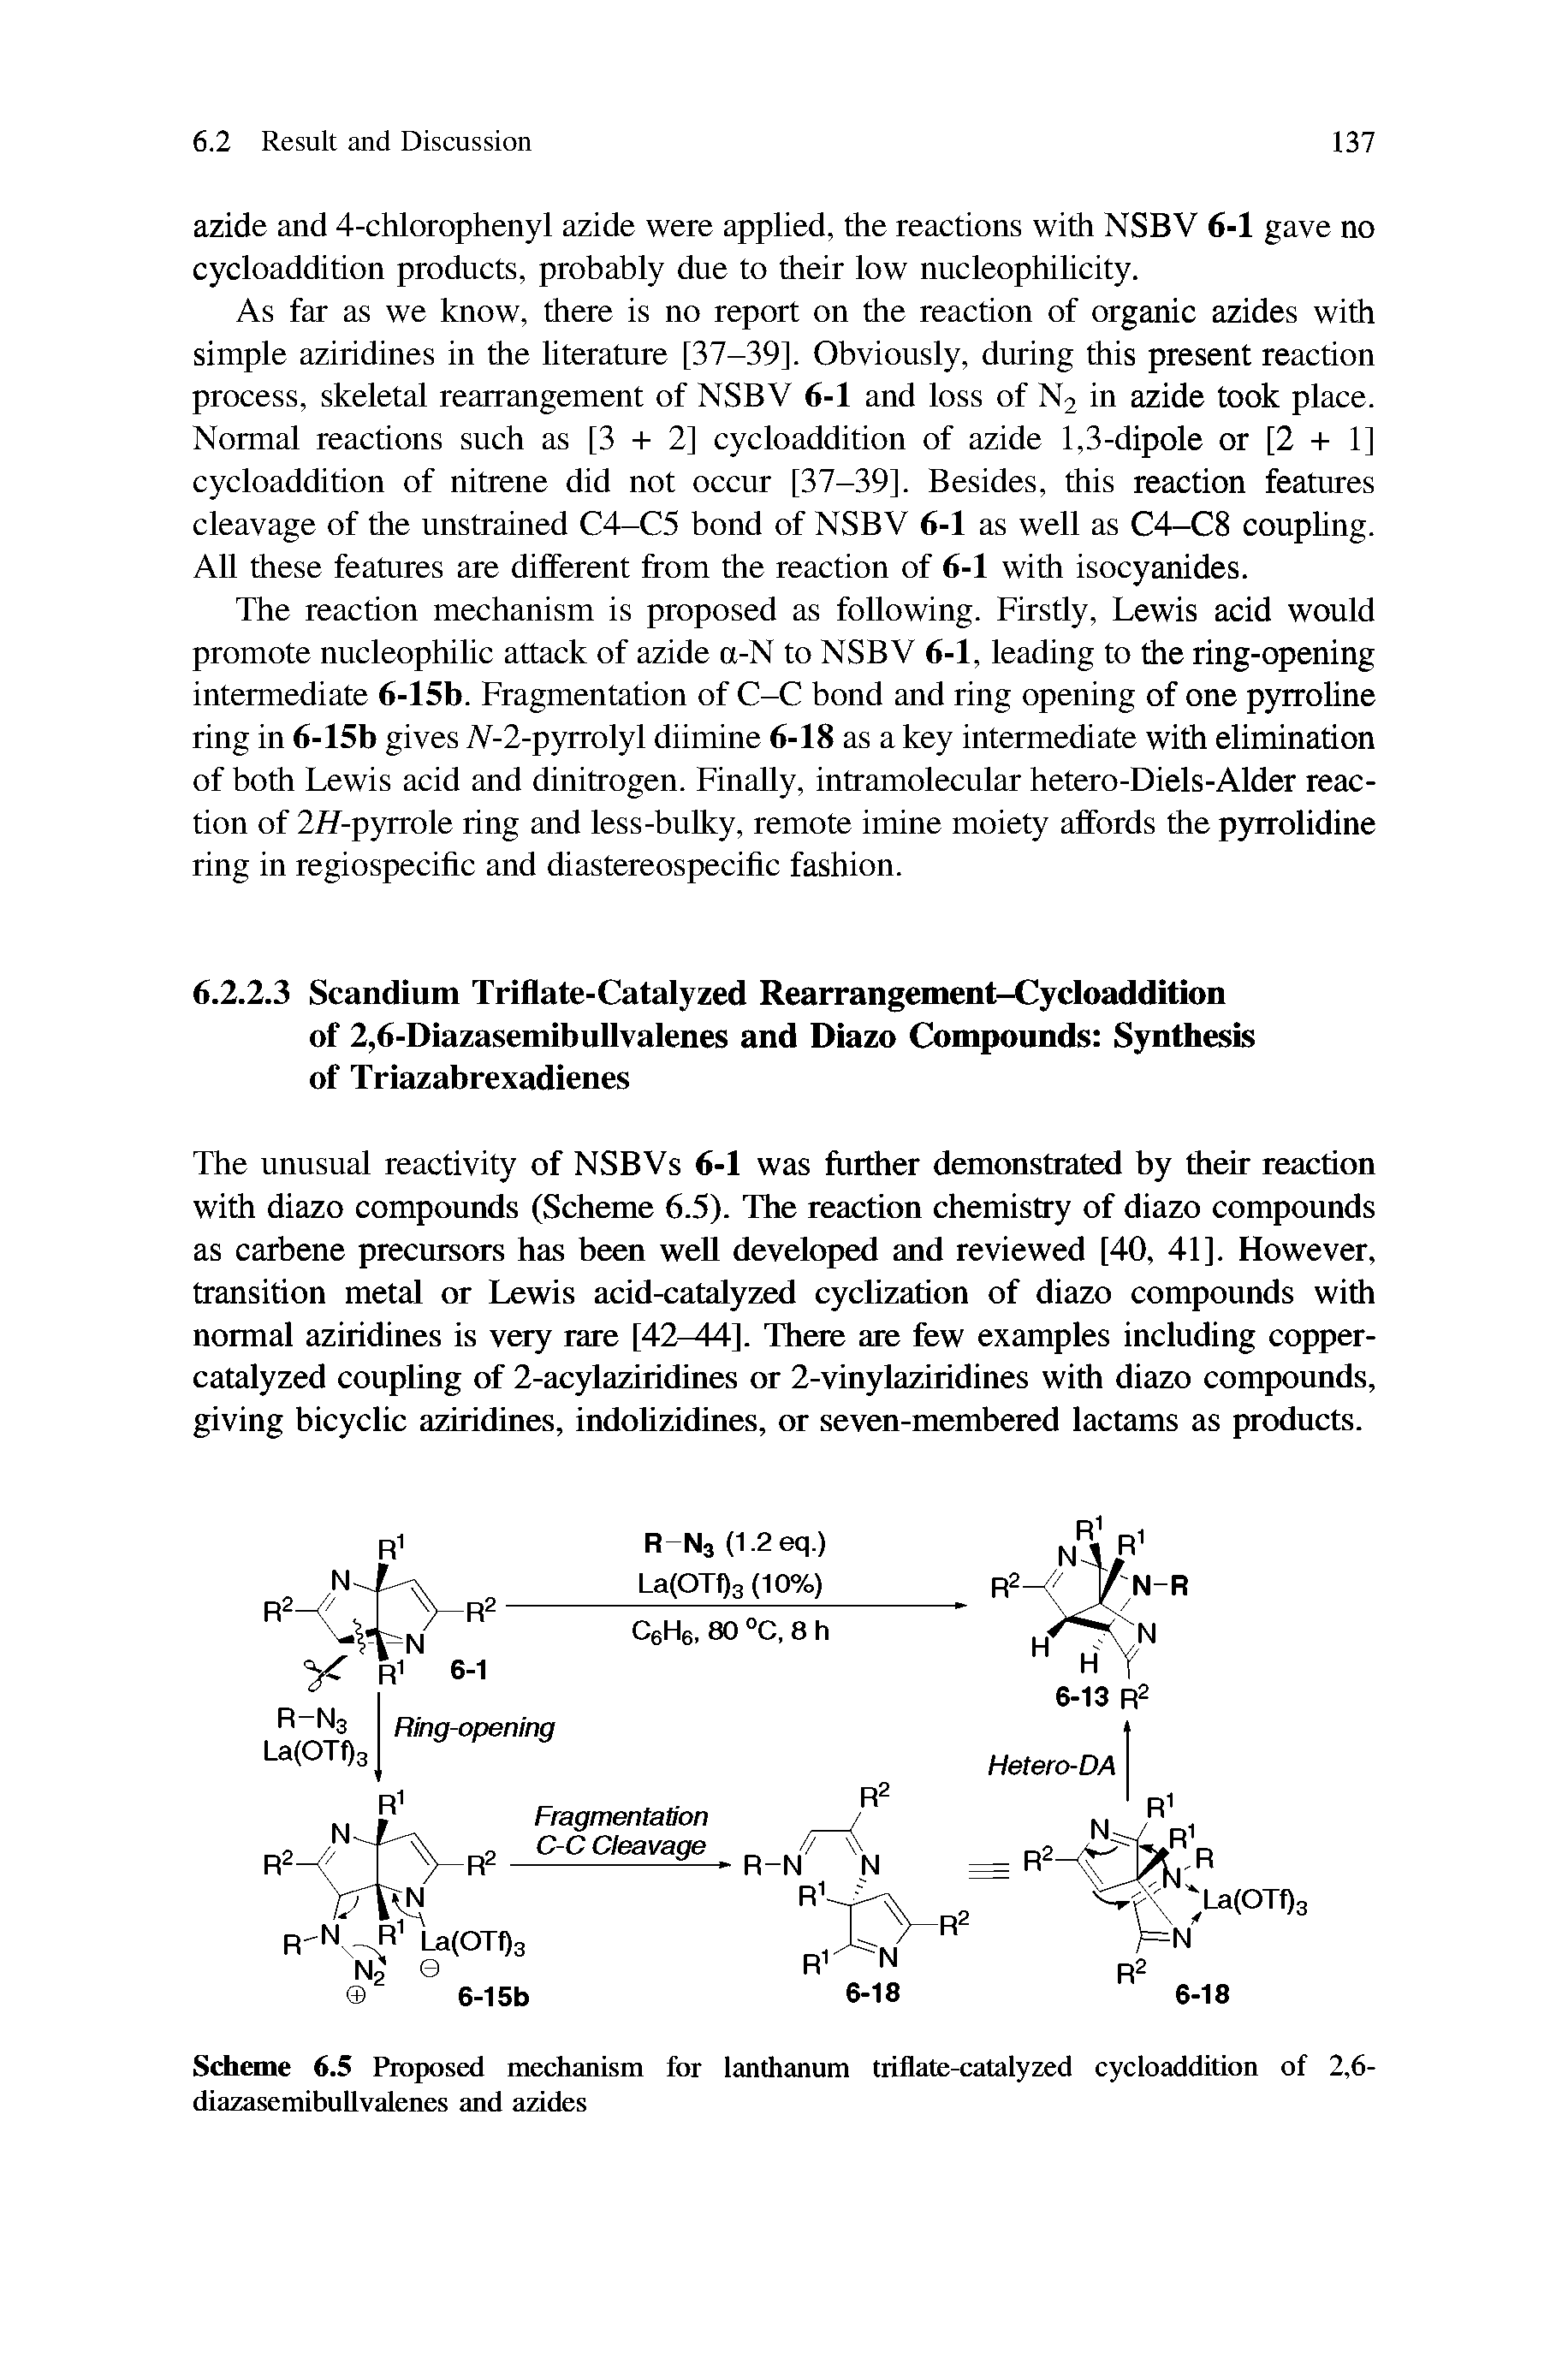 Scheme 6.5 Proposed mechanism for lanthanum triflate-catalyzed cycloaddition of 2,6-diazasemibuUvalenes and azides...